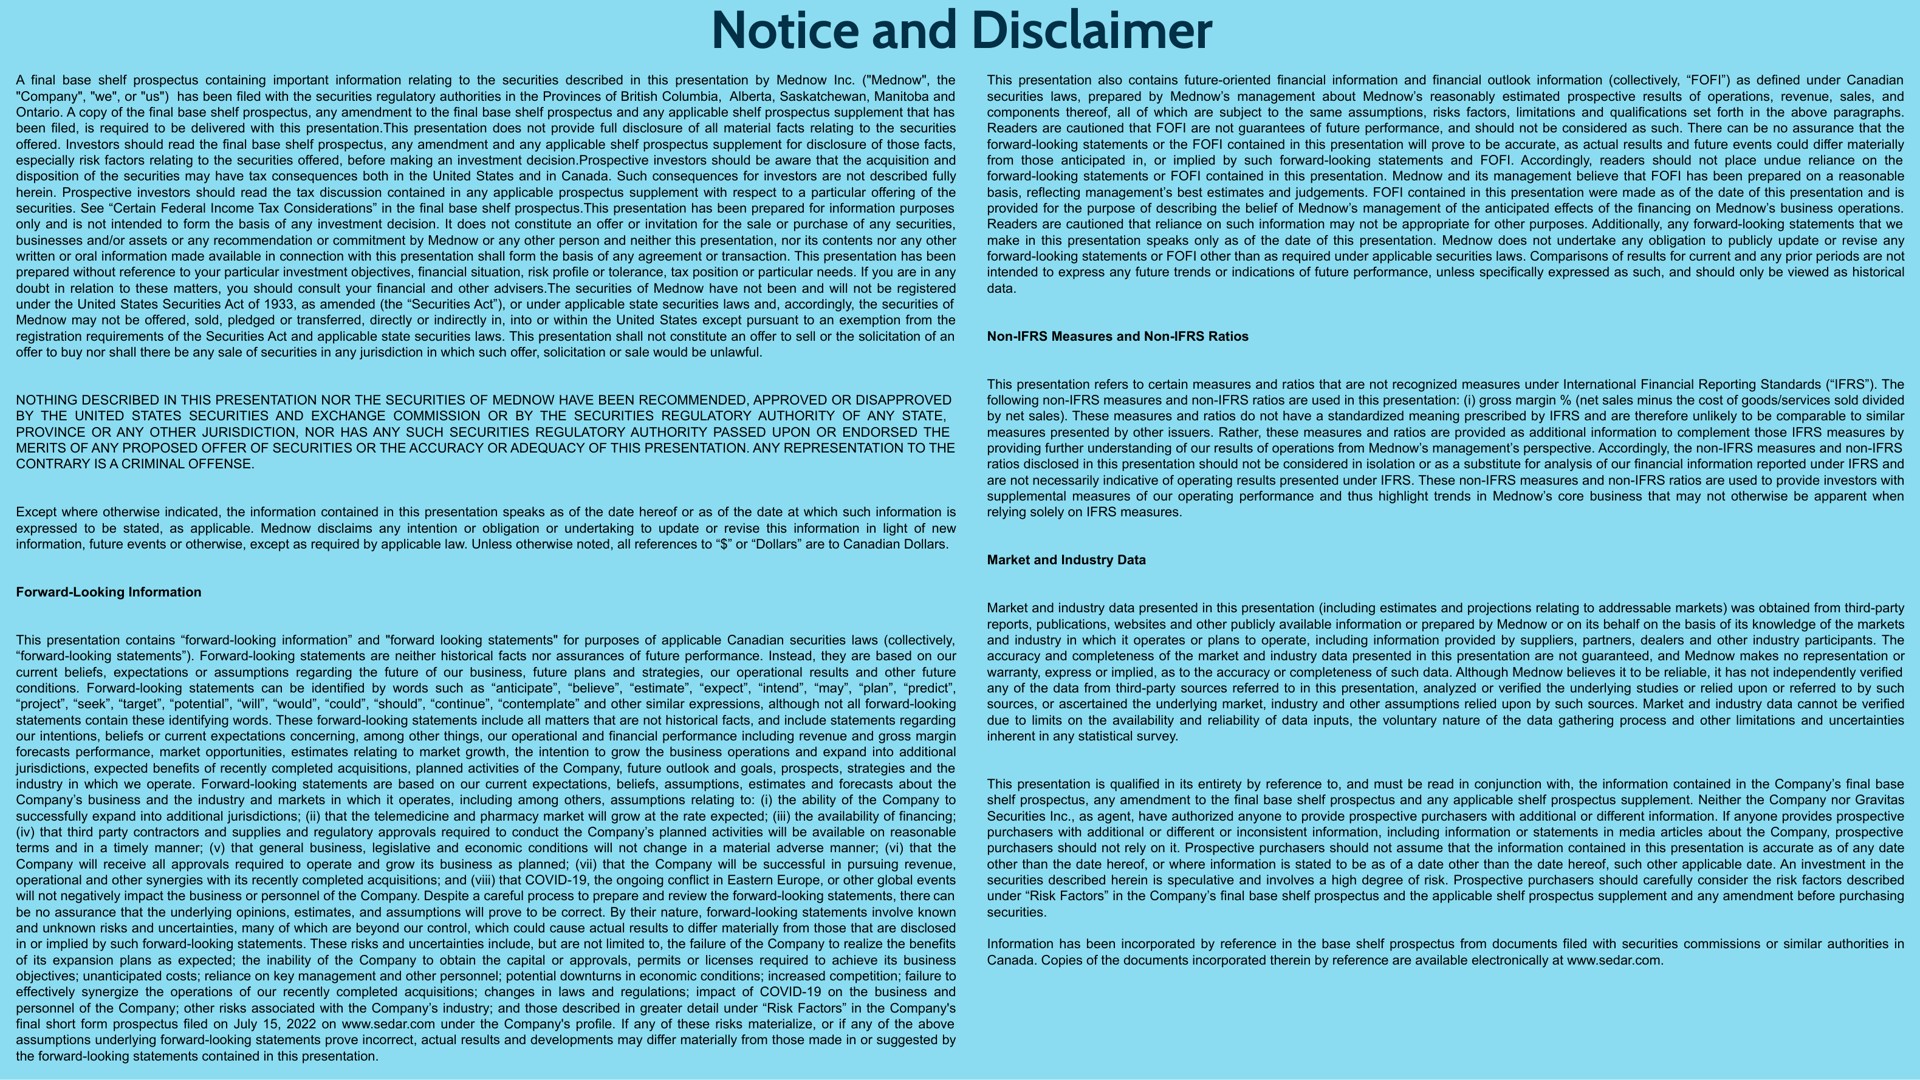 notice and disclaimer | Mednow